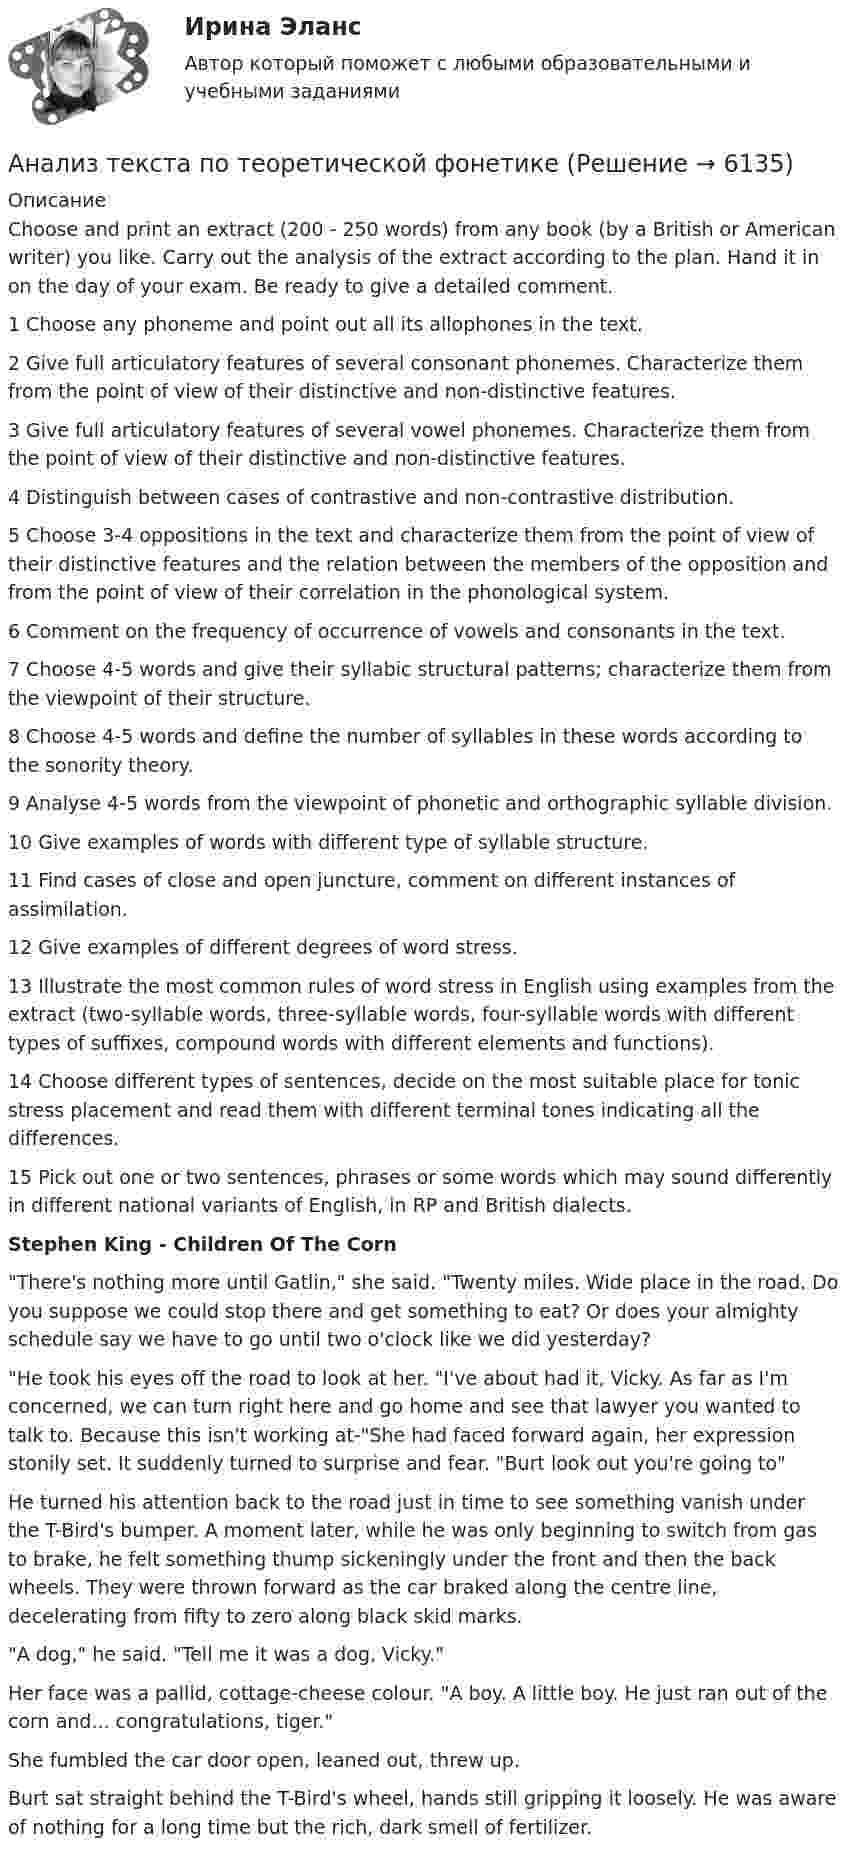      
          Описание
          Choose and print an extract (200 - 250 words) from any book (by a British or American writer) you like. Carry out the analysis of the extract according to the plan. Hand it in on the day of your exam. Be ready to give a detailed comment.1 Choose any phoneme and point out all its allophones in the text.2 Give full articulatory features of several consonant phonemes. Characterize them from the point of view of their distinctive and non-distinctive features.3 Give full articulatory features of several vowel phonemes. Characterize them from the point of view of their distinctive and non-distinctive features.4 Distinguish between cases of contrastive and non-contrastive distribution.5 Choose 3-4 oppositions in the text and characterize them from the point of view of their distinctive features and the relation between the members of the opposition and from the point of view of their correlation in the phonological system.6 Comment on the frequency of occurrence of vowels and consonants in the text.7 Choose 4-5 words and give their syllabic structural patterns; characterize them from the viewpoint of their structure.8 Choose 4-5 words and define the number of syllables in these words according to the sonority theory.9 Analyse 4-5 words from the viewpoint of phonetic and orthographic syllable division.10 Give examples of words with different type of syllable structure.11 Find cases of close and open juncture, comment on different instances of assimilation.12 Give examples of different degrees of word stress.13 Illustrate the most common rules of word stress in English using examples from the extract (two-syllable words, three-syllable words, four-syllable words with different types of suffixes, compound words with different elements and functions).14 Choose different types of sentences, decide on the most suitable place for tonic stress placement and read them with different terminal tones indicating all the differences.15 Pick out one or two sentences, phrases or some words which may sound differently in different national variants of English, in RP and British dialects.Stephen King - Children Of The CornThere's nothing more until Gatlin, she said. Twenty miles. Wide place in the road. Do you suppose we could stop there and get something to eat? Or does your almighty schedule say we have to go until two o'clock like we did yesterday?He took his eyes off the road to look at her. I've about had it, Vicky. As far as I'm concerned, we can turn right here and go home and see that lawyer you wanted to talk to. Because this isn't working at-She had faced forward again, her expression stonily set. It suddenly turned to surprise and fear. Burt look out you're going toHe turned his attention back to the road just in time to see something vanish under the T-Bird's bumper. A moment later, while he was only beginning to switch from gas to brake, he felt something thump sickeningly under the front and then the back wheels. They were thrown forward as the car braked along the centre line, decelerating from fifty to zero along black skid marks.A dog, he said. Tell me it was a dog, Vicky.Her face was a pallid, cottage-cheese colour. A boy. A little boy. He just ran out of the corn and... congratulations, tiger.She fumbled the car door open, leaned out, threw up.Burt sat straight behind the T-Bird's wheel, hands still gripping it loosely. He was aware of nothing for a long time but the rich, dark smell of fertilizer.  
            
            
            Анализ с целью ответить на вопрос: «Что будет, если…?» называется …Анализ текста по теоретической фонетикеАнализ торговой деятельностиАнализ торговой деятельности 2Анализ трудностей реализации стратегииАнализ трудового конфликта в организации и методы его разрешения Анализ туристско-рекреационных проектов субъекта РФАнализ статьи. Тайм-менеджментАнализ стихотворения В.Ф. Раевского К СЕЛЬСКОМУ УБЕЖИЩУАнализ стратегии конкуренции организацииАнализ стратегического планированияАнализ страхового рынка КазахстанаАнализ структуры и динамики платежных балансов Анализ структуры форм реализации ГЧП